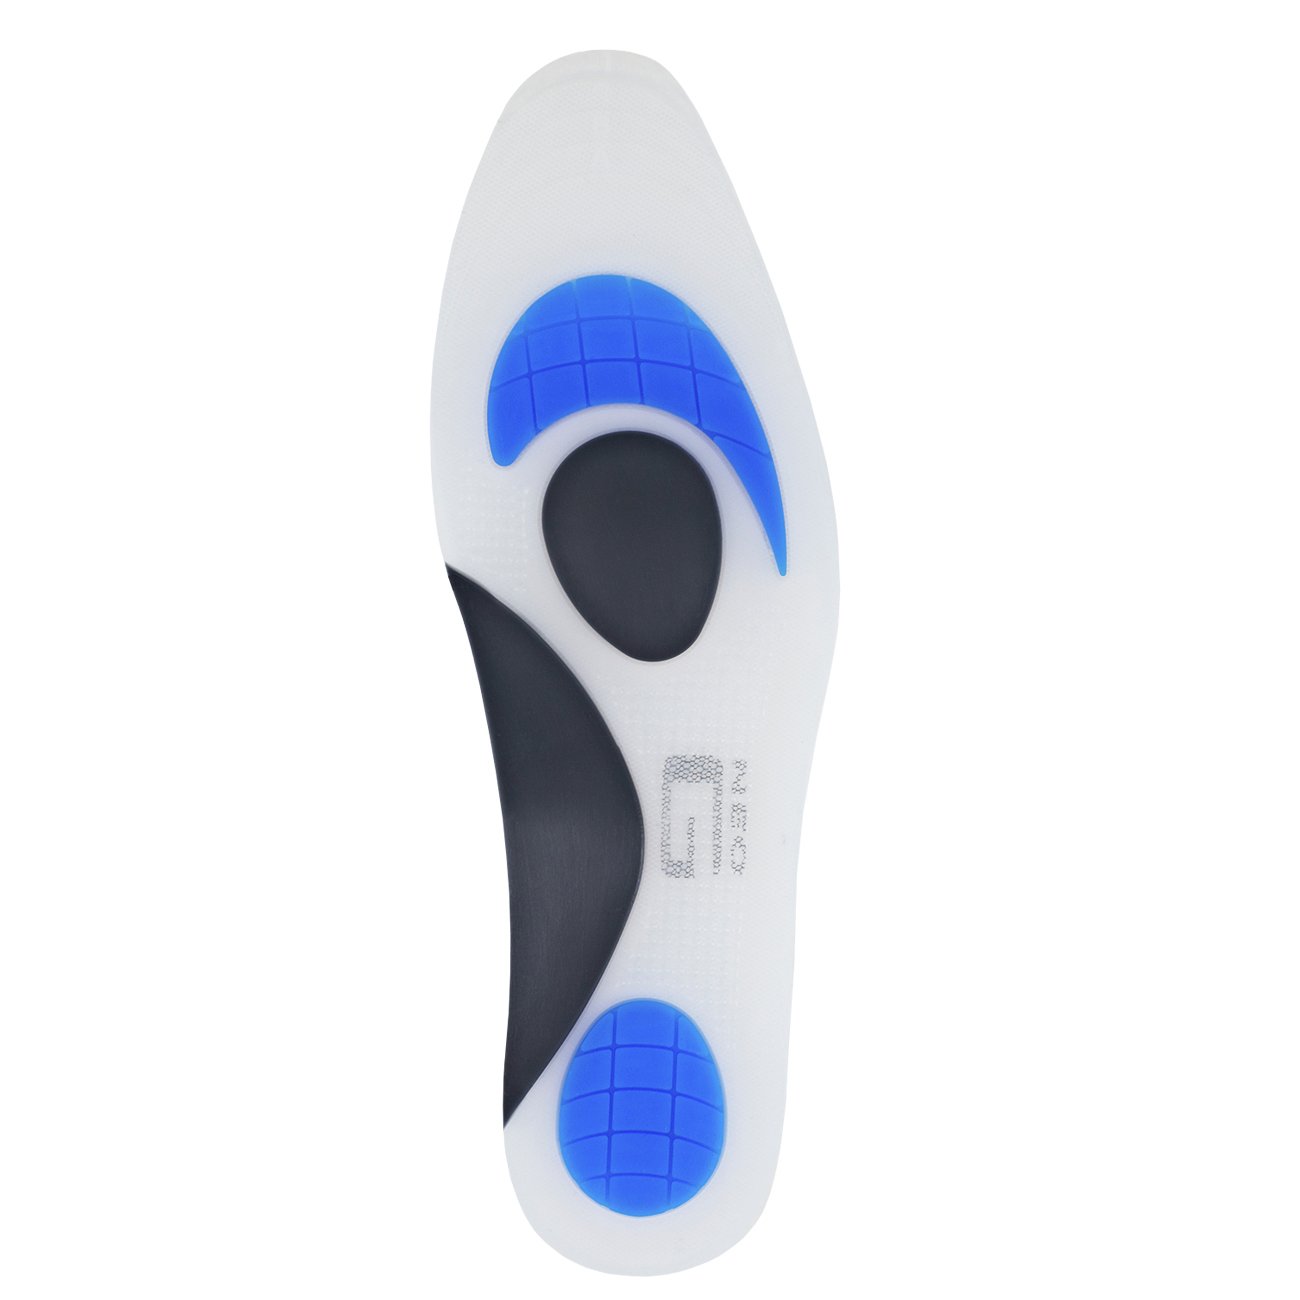 Neo G Neothotics Full Length Insoles review